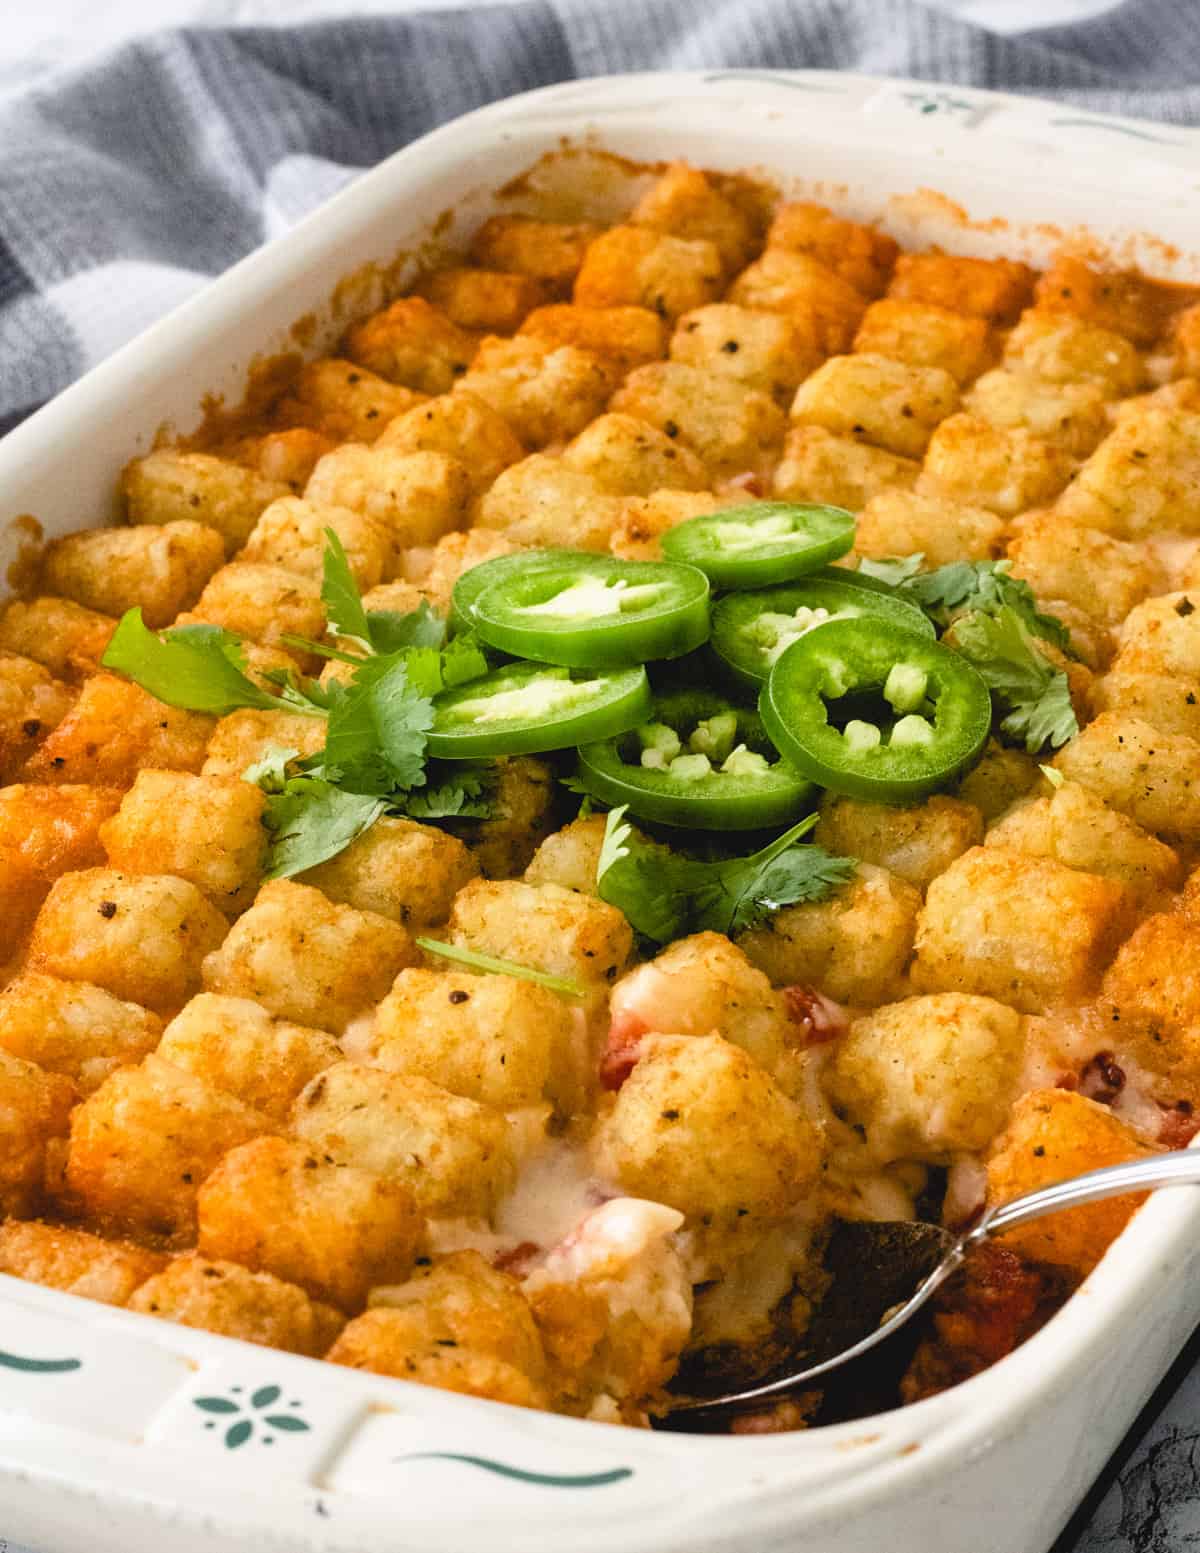 Tater tot casserole with a scoop missing.